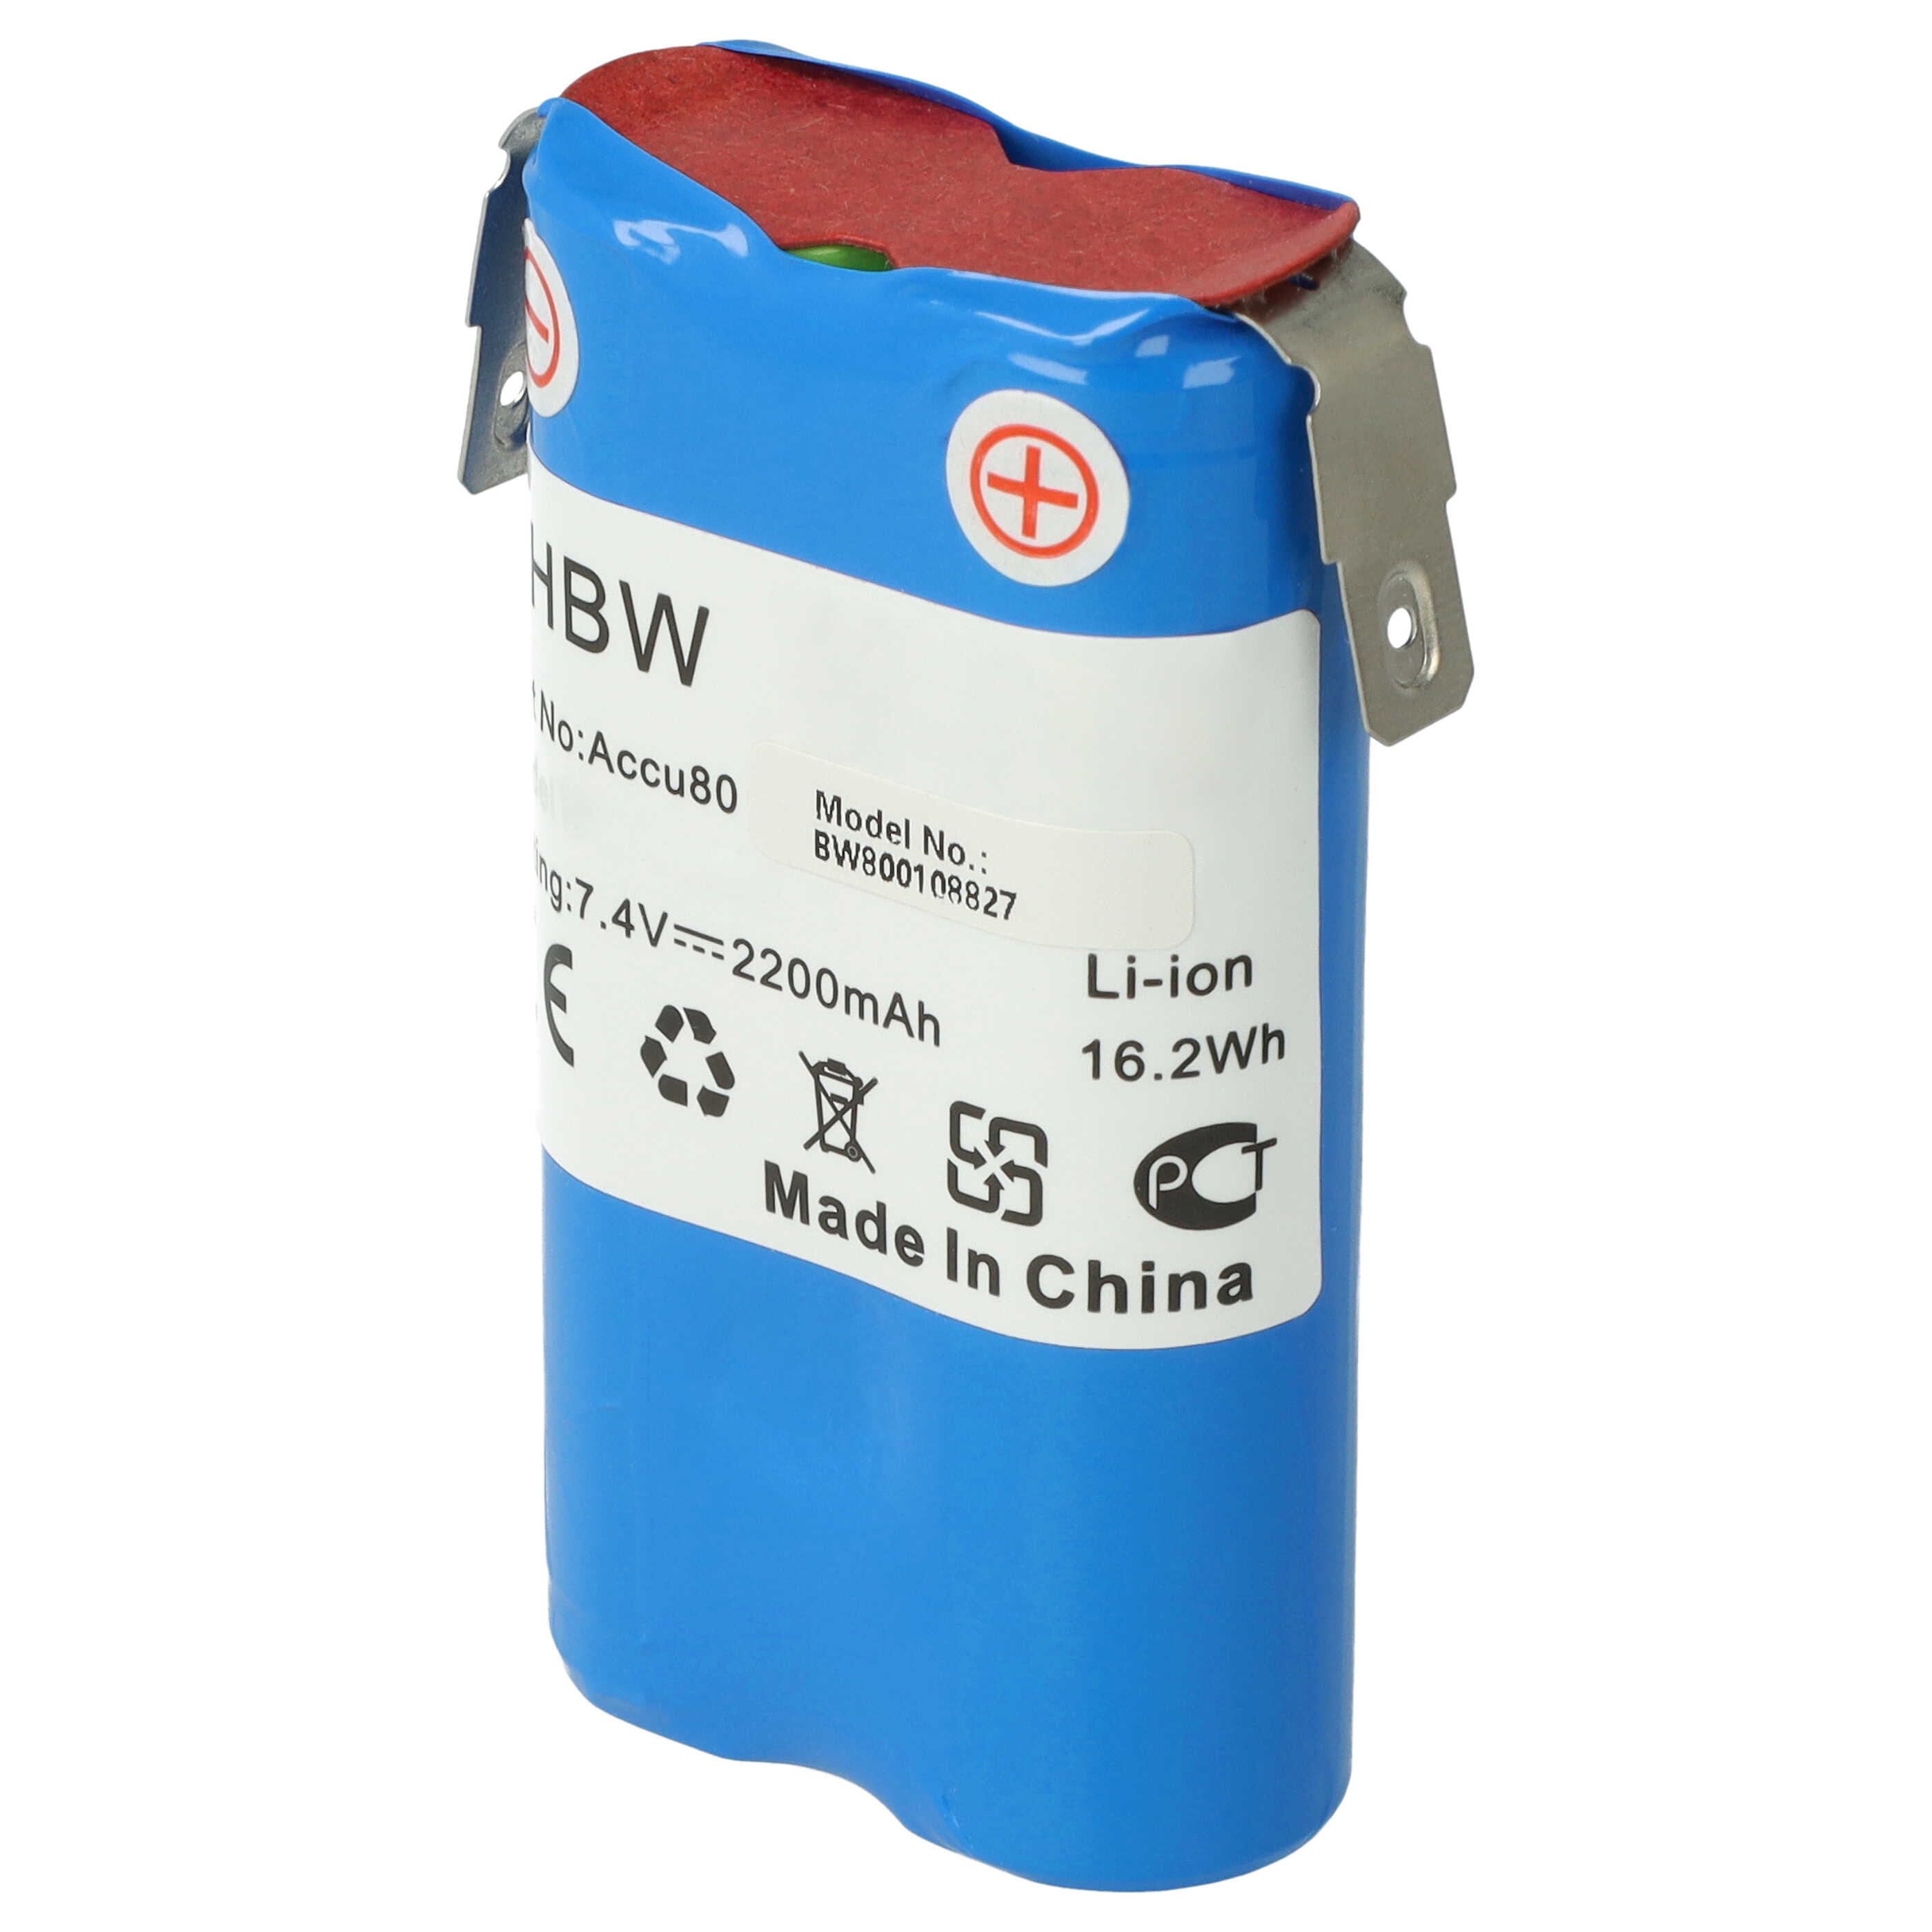 Lawnmower Battery Replacement for 8802-00.640.00, Accu80 - 2200mAh 7.2V Li-Ion